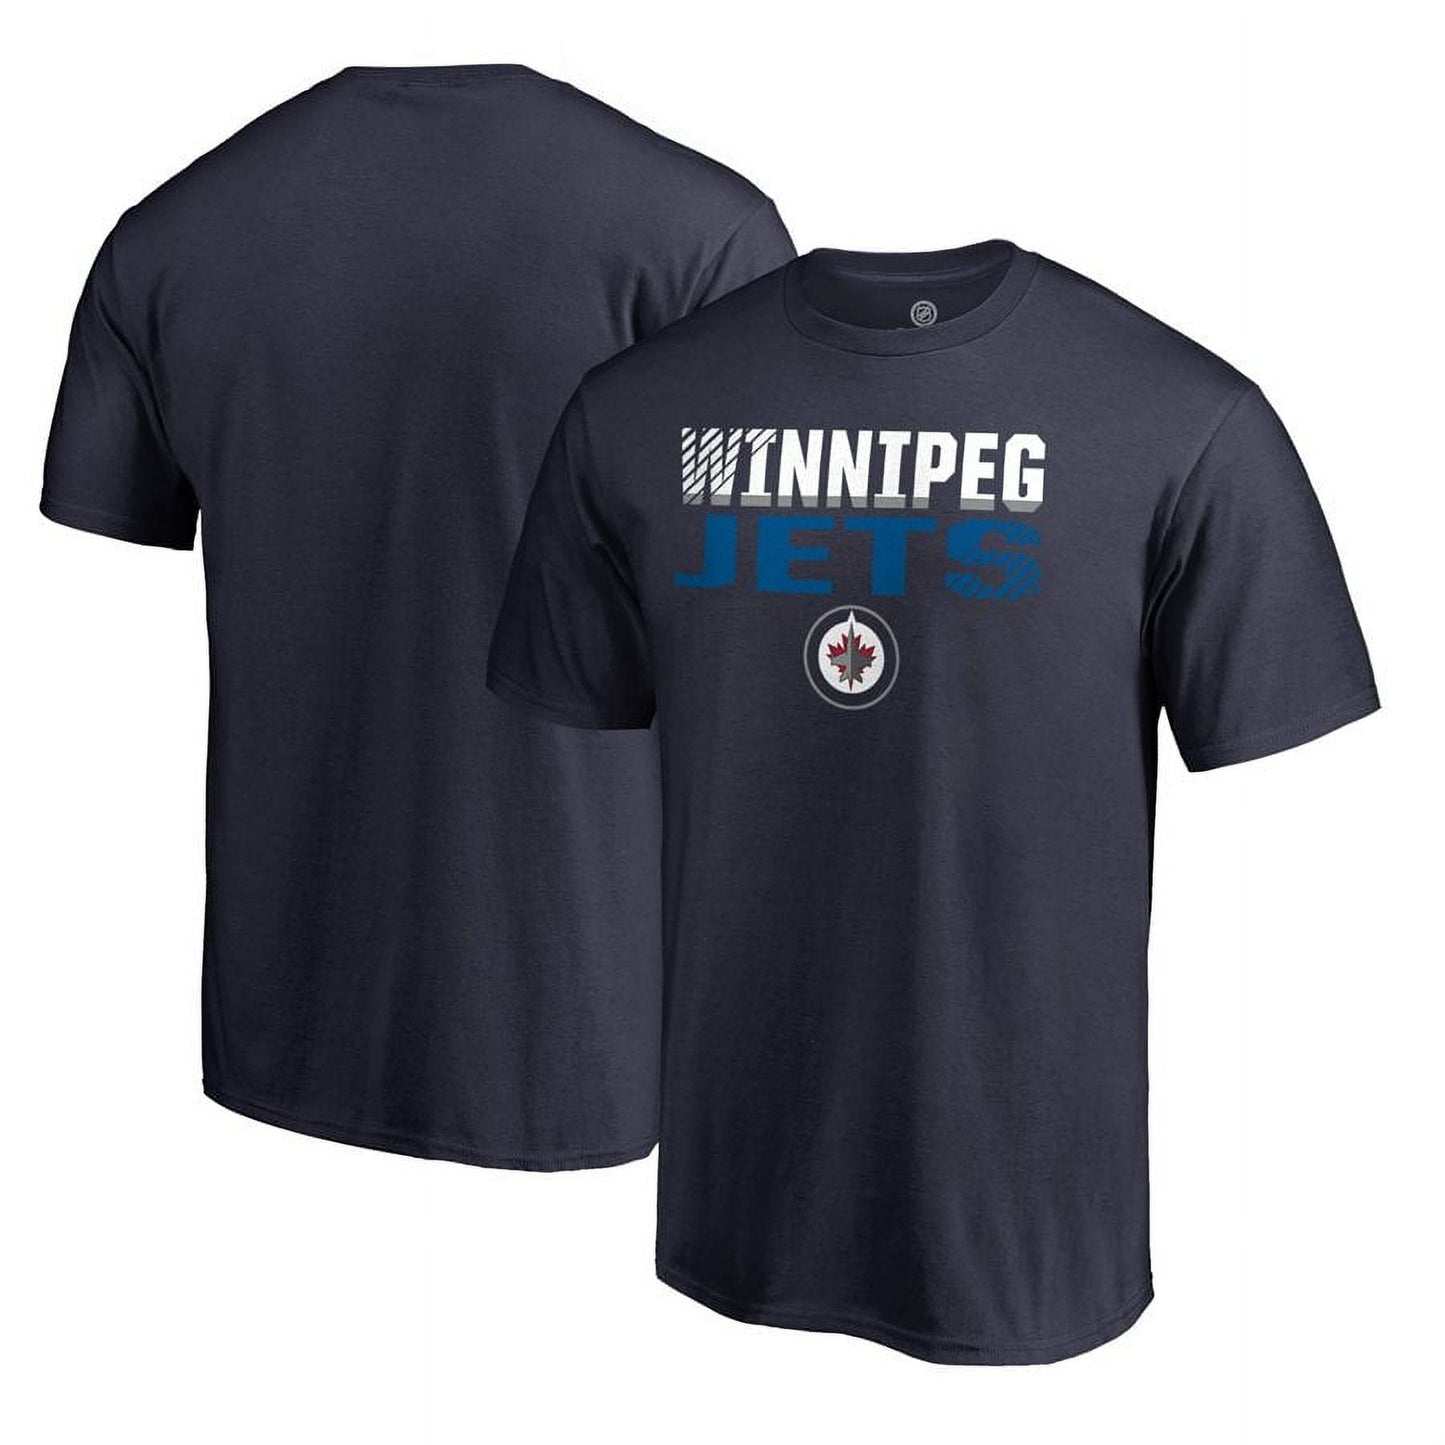 Men's Fanatics Branded Navy Winnipeg Jets Iconic Collection Fade Out T-Shirt